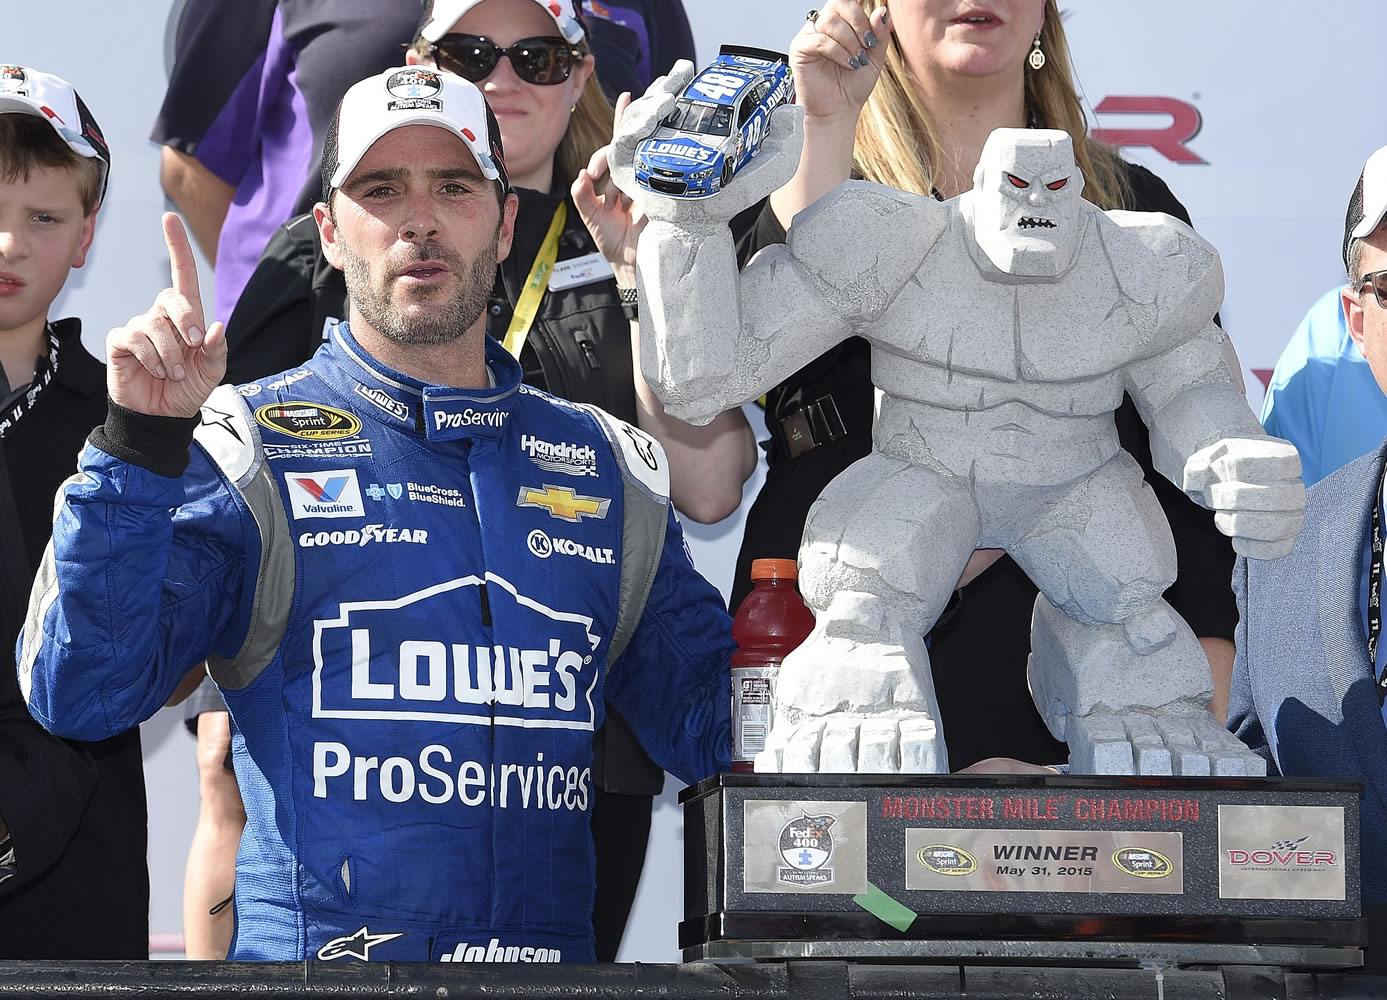 Jimmie Johnson poses with the Monster MIle trophy in Victory Lane after he won the NASCAR Sprint Cup race, Sunday, May 31, 2015, at Dover International Speedway in Dover, Del.